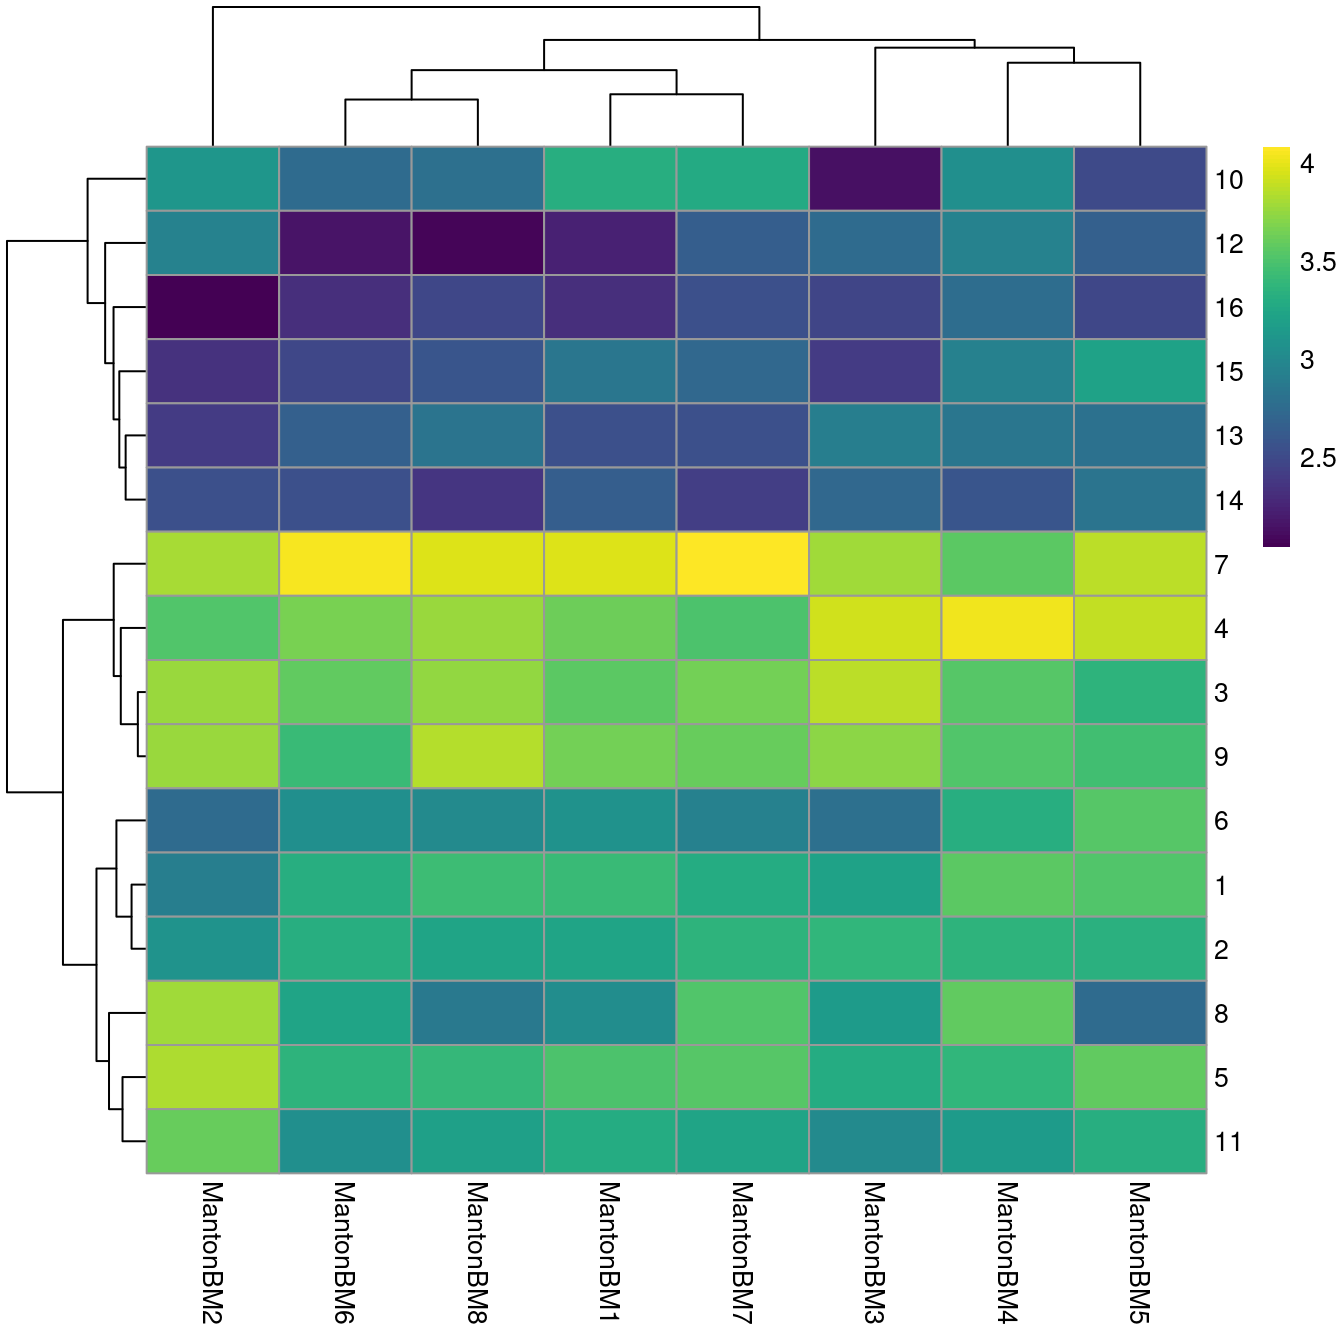 Heatmap of log~10~-number of cells in each cluster (row) from each sample (column).